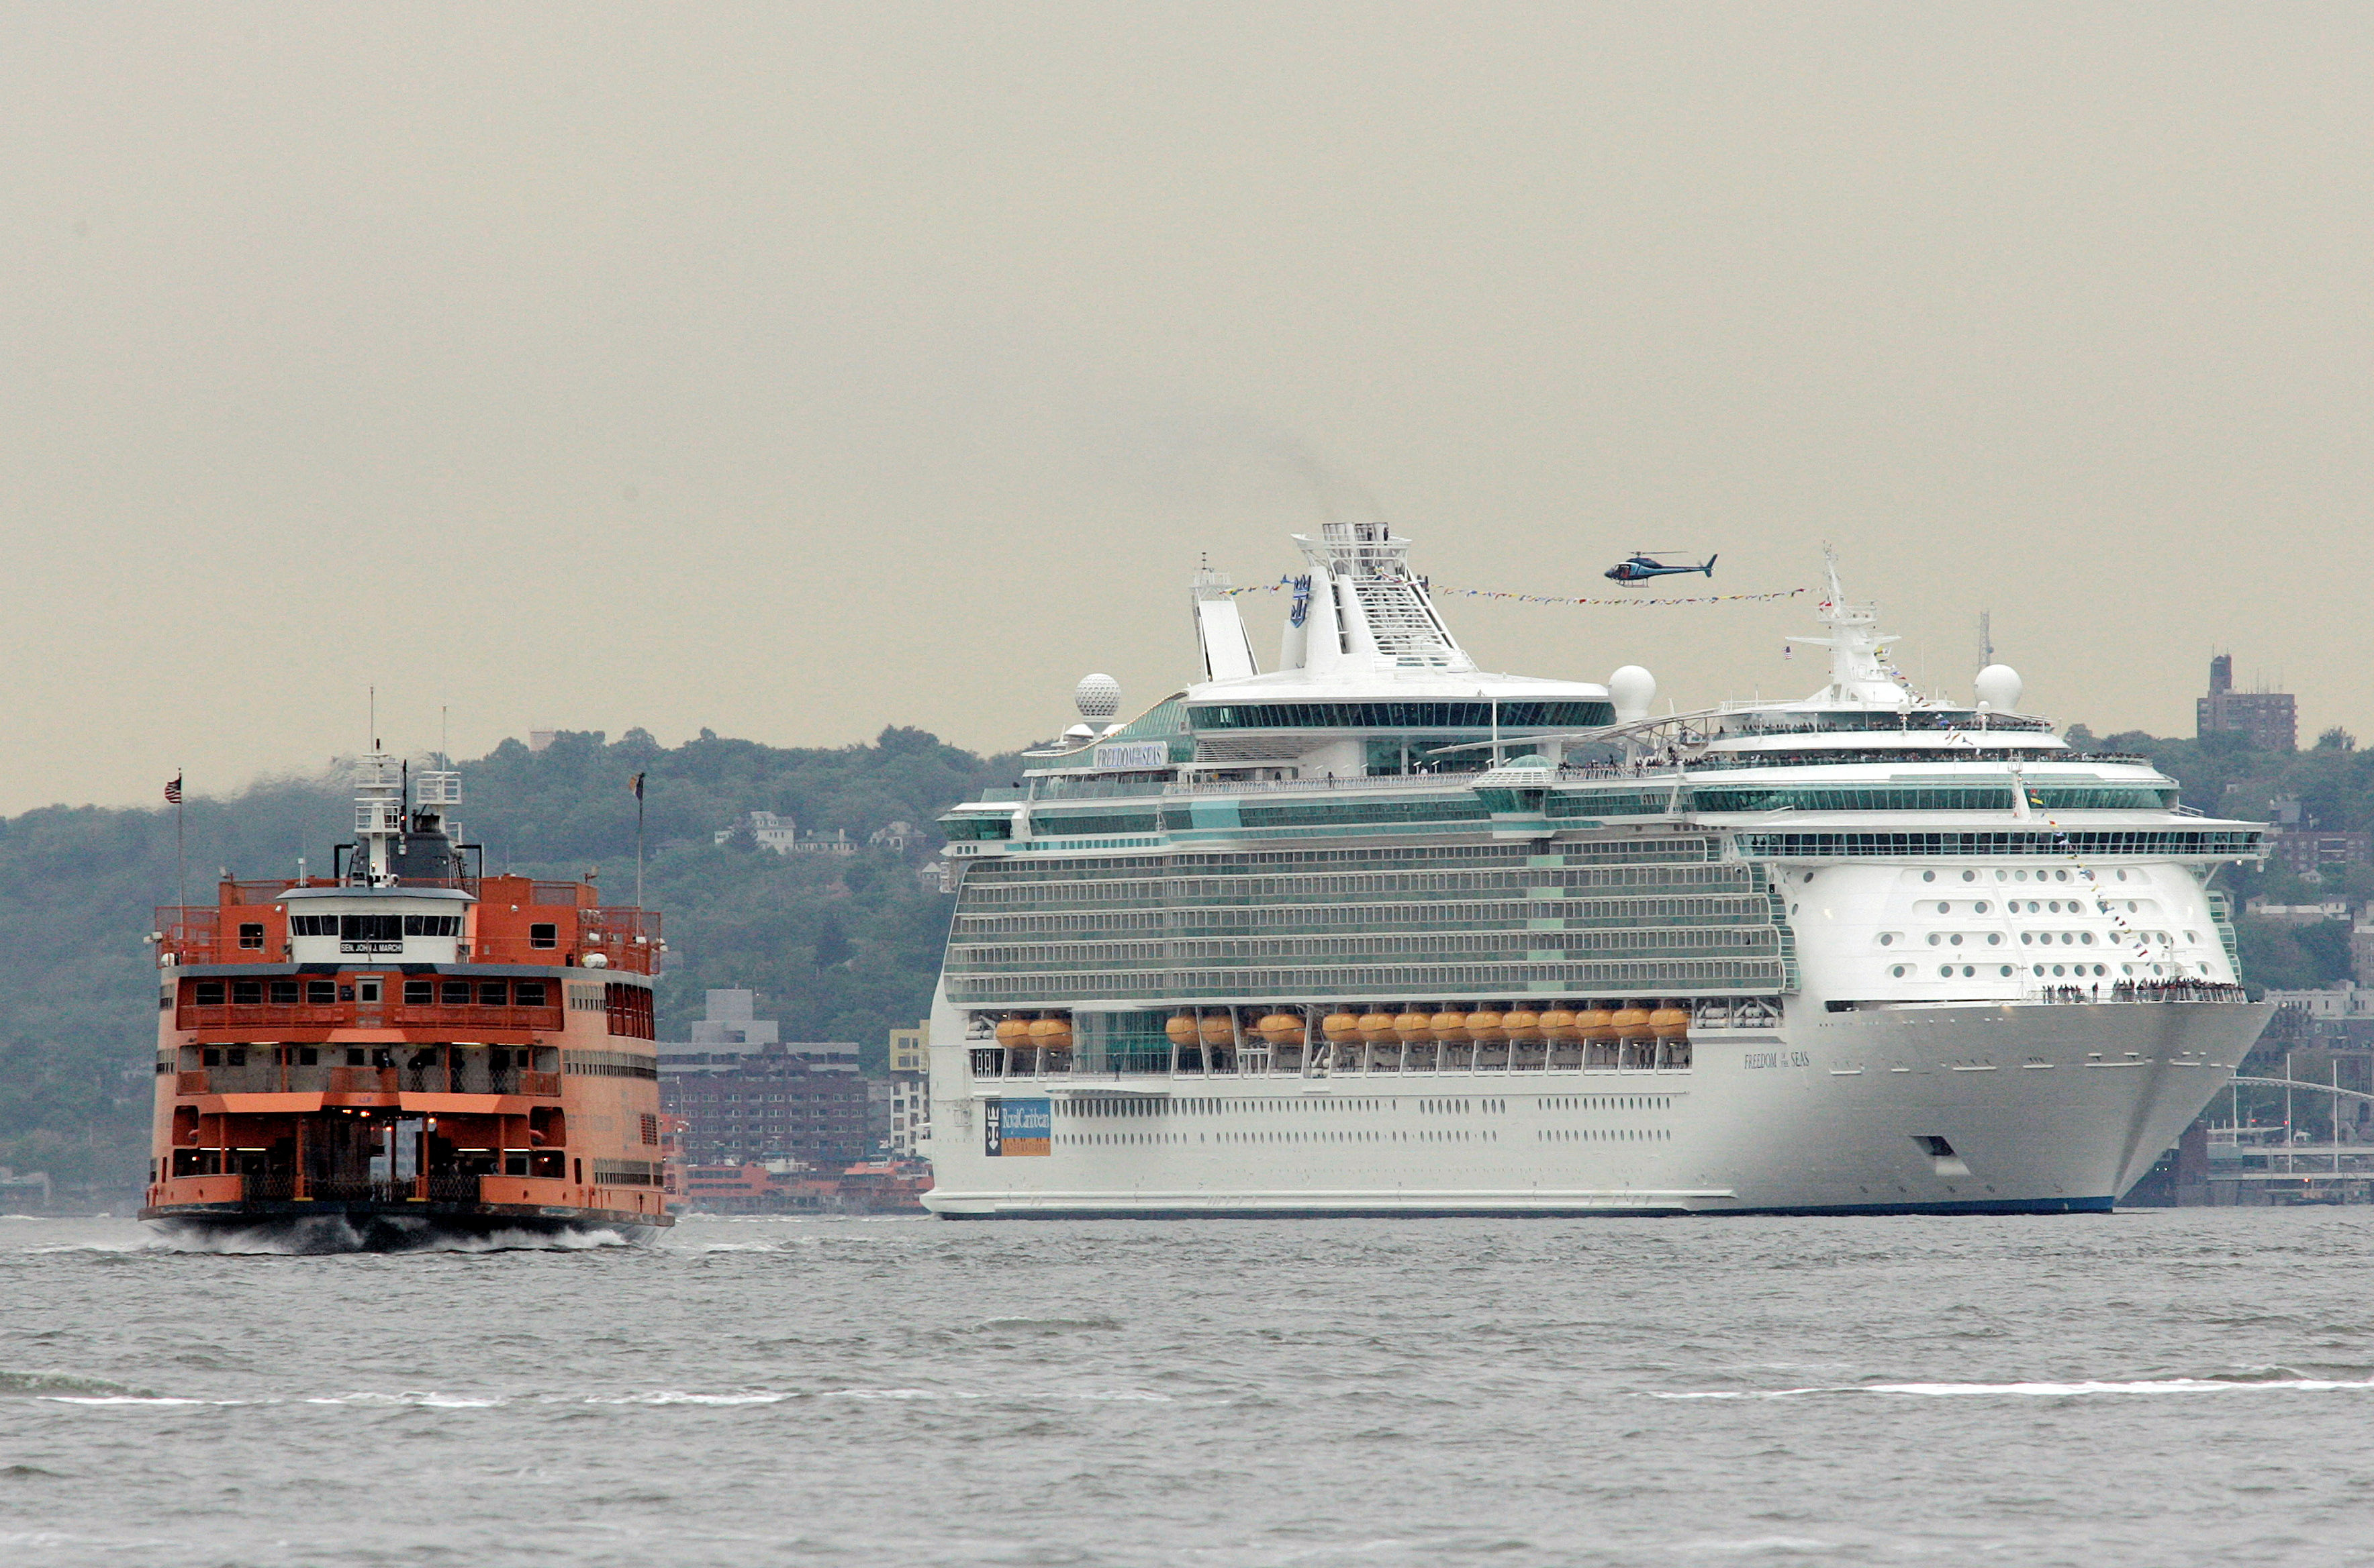 Staten Island Ferry cruises past Royal Caribbean cruise ship Freedom of the Seas as it makes its way up Hudson River in New York